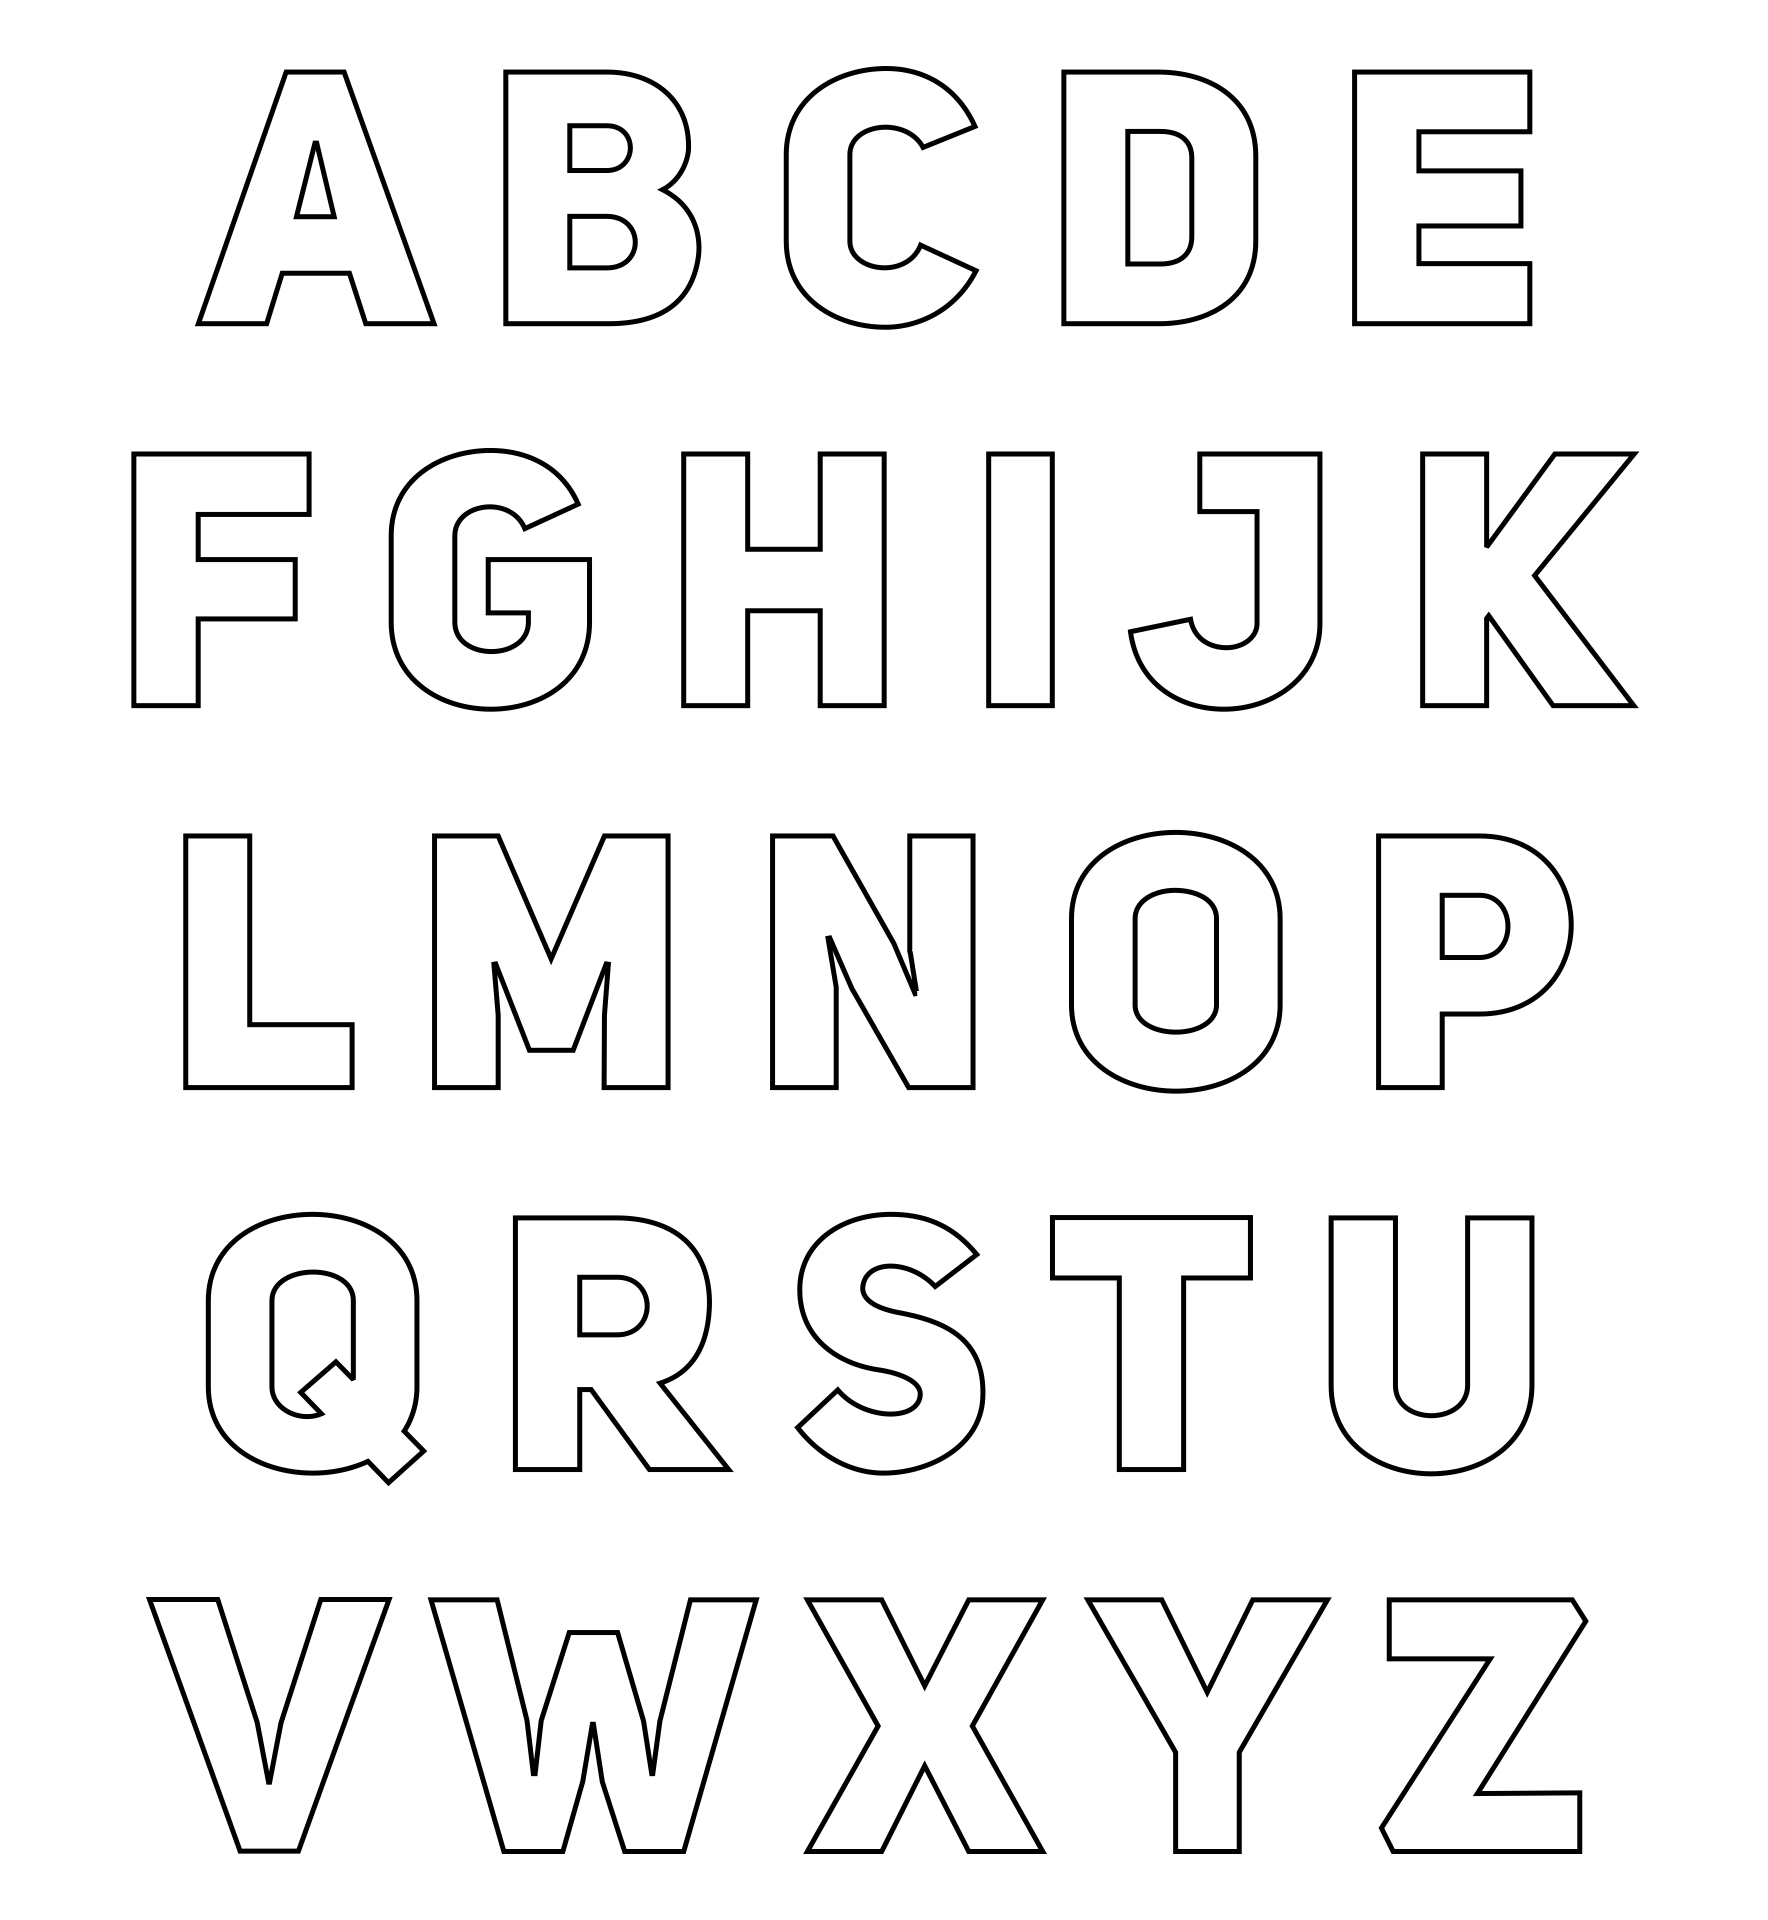 6-best-images-of-printable-cut-out-letters-free-cut-out-letters-stencils-letter-stencils-to